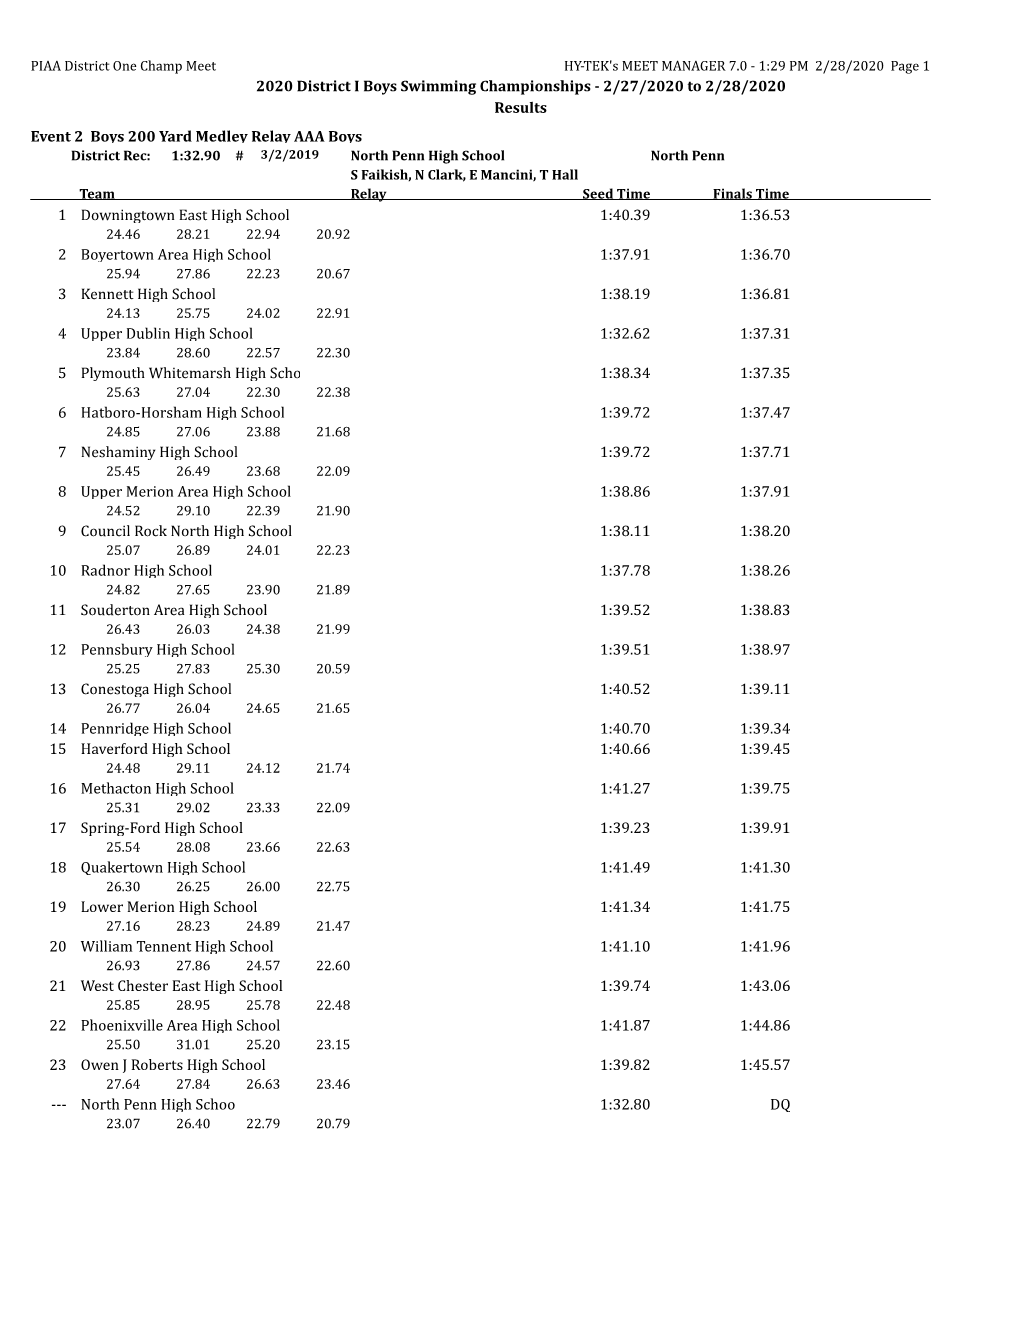 2/27/2020 to 2/28/2020 Results Event 2 Boys 200 Yard Medley Relay AAA